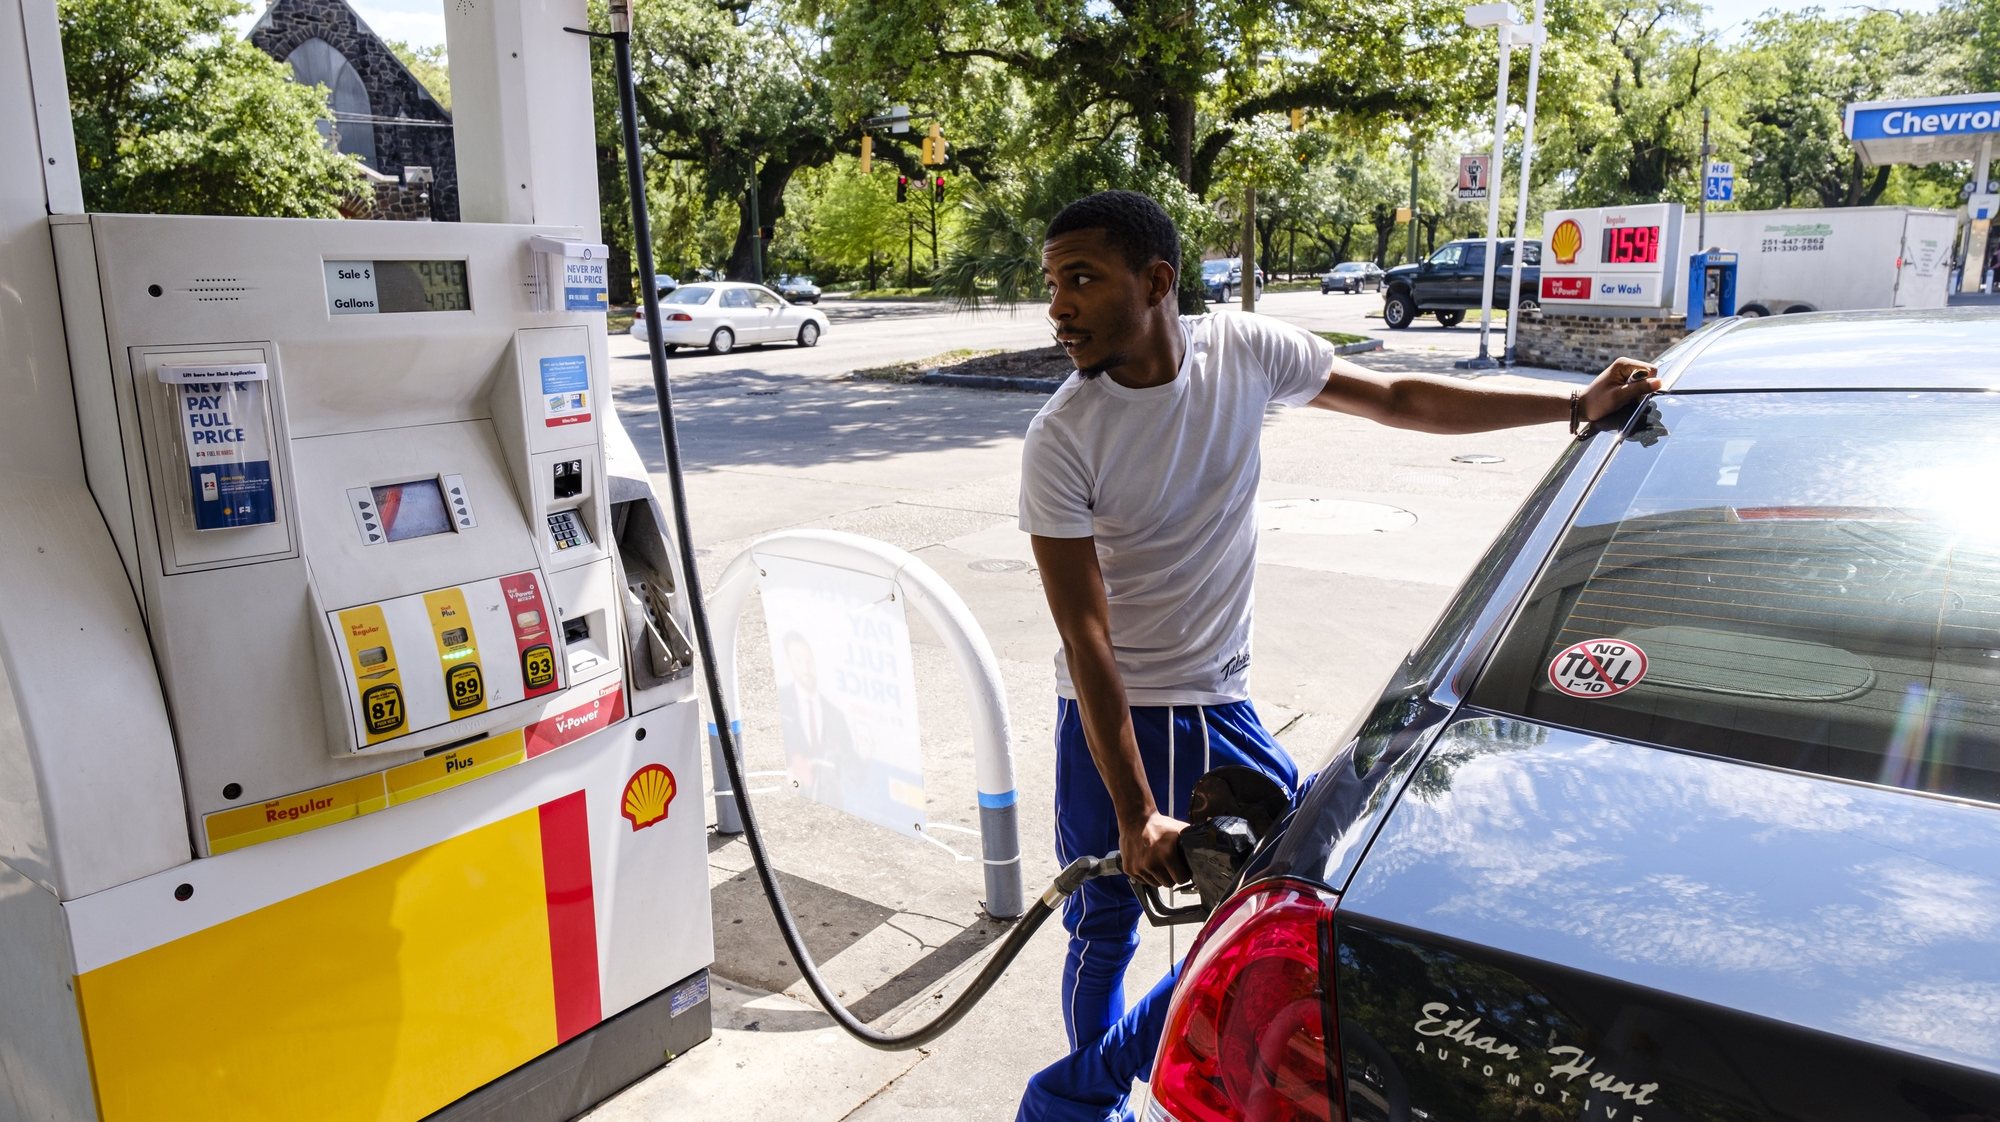 epa08374225 Matthew Gibbs fills up his car at a Shell station in  Mobile, Alabama, USA, 20 April 2020. US crude oil futures plummet to minus 37.63 US dollars a barrel, the lowest price in history.  EPA/DAN ANDERSON